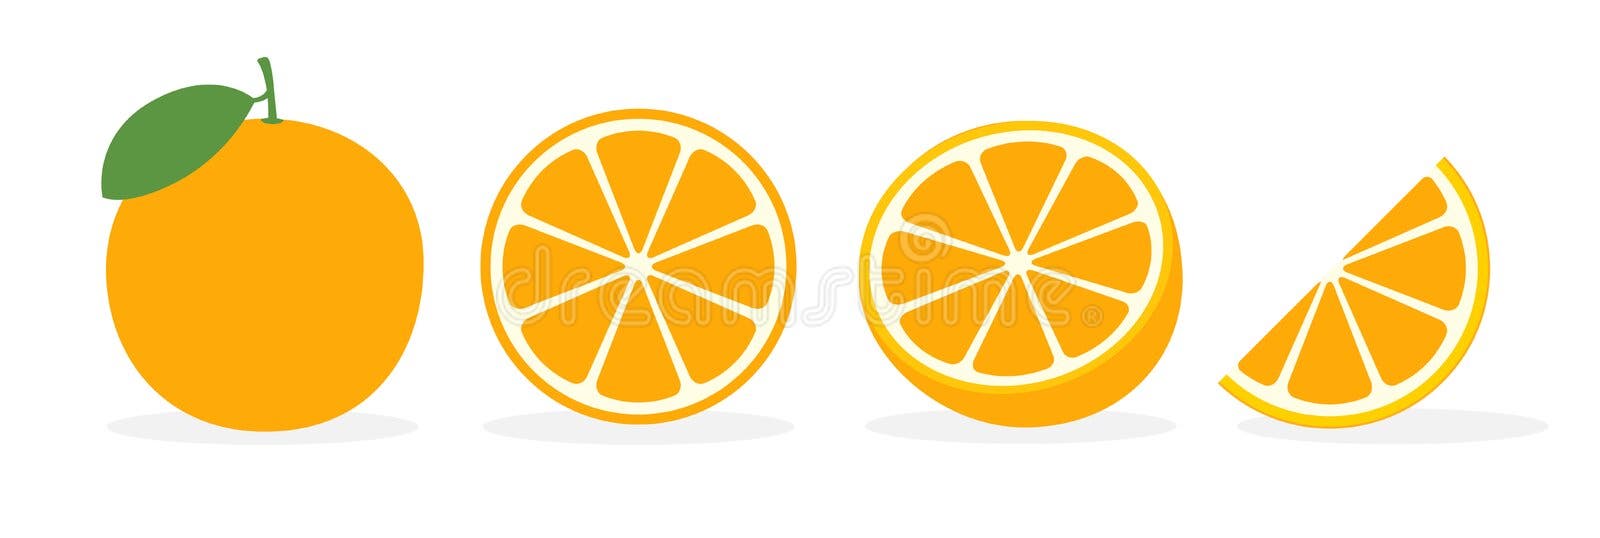 A Female Doctor Who Knows The Effects Of Vitamin C. On A White Background.  Royalty Free SVG, Cliparts, Vectors, and Stock Illustration. Image  170971906.